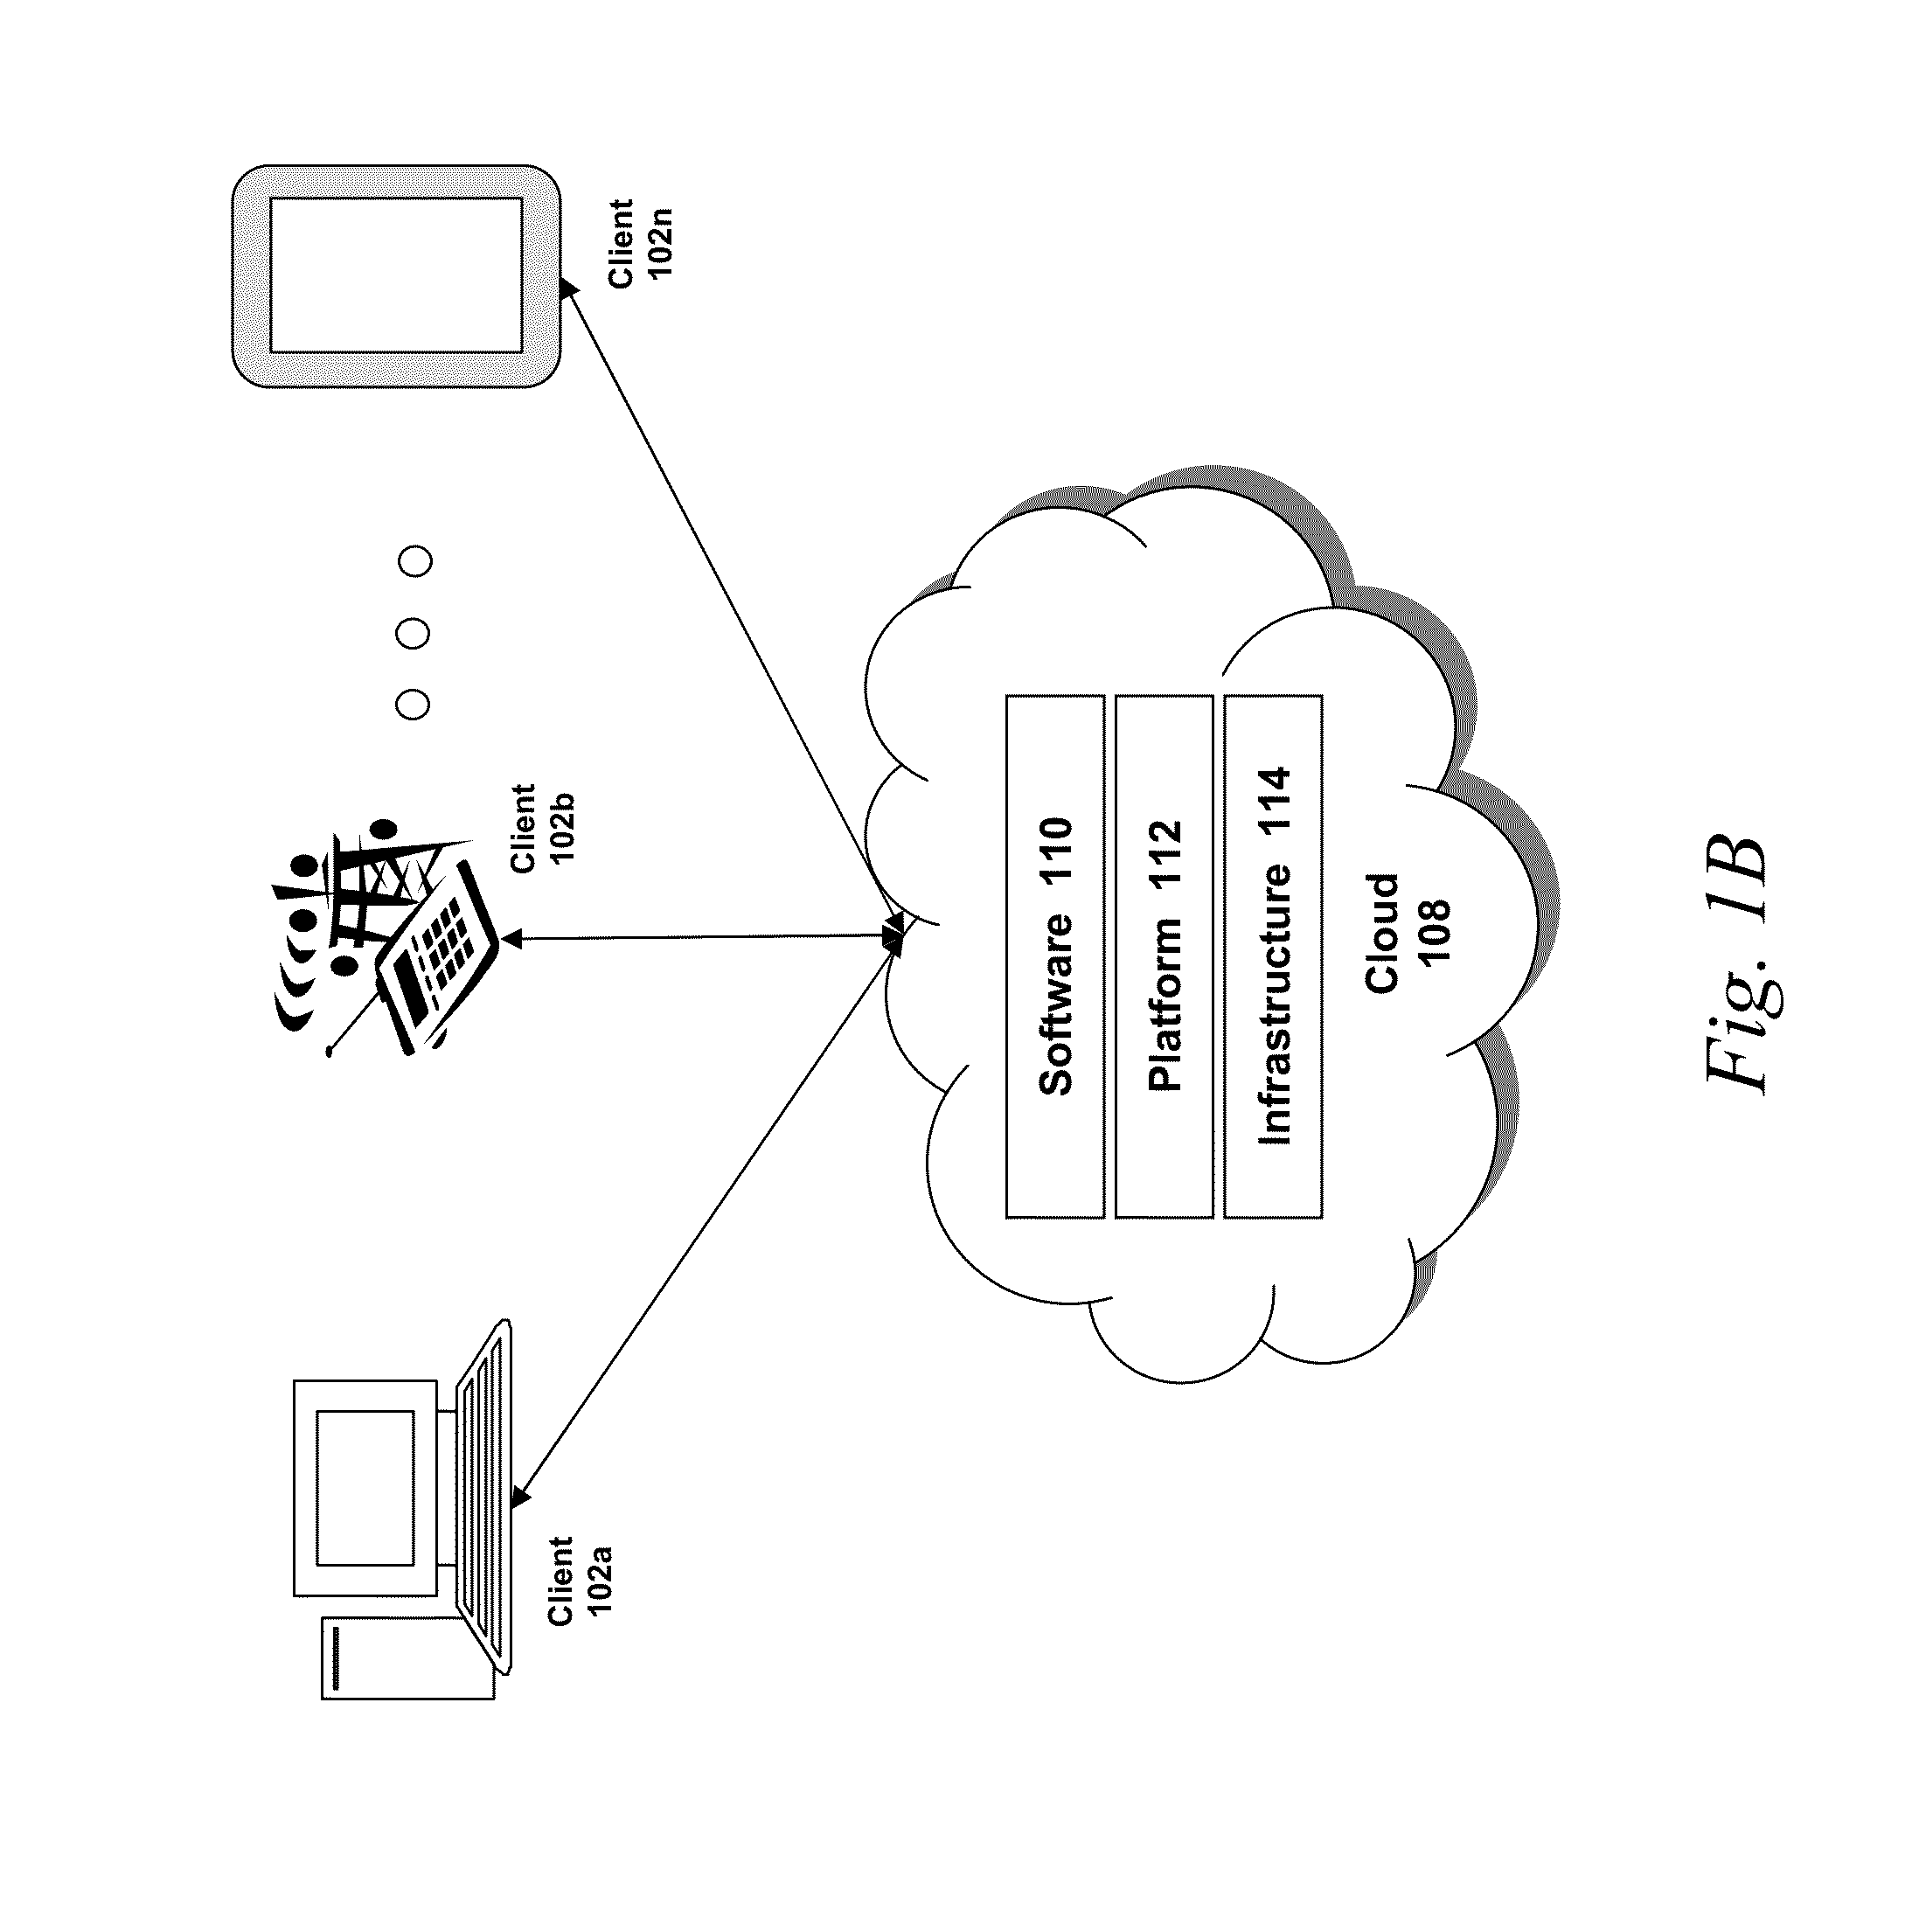 Systems and methods for secure and private delivery of content